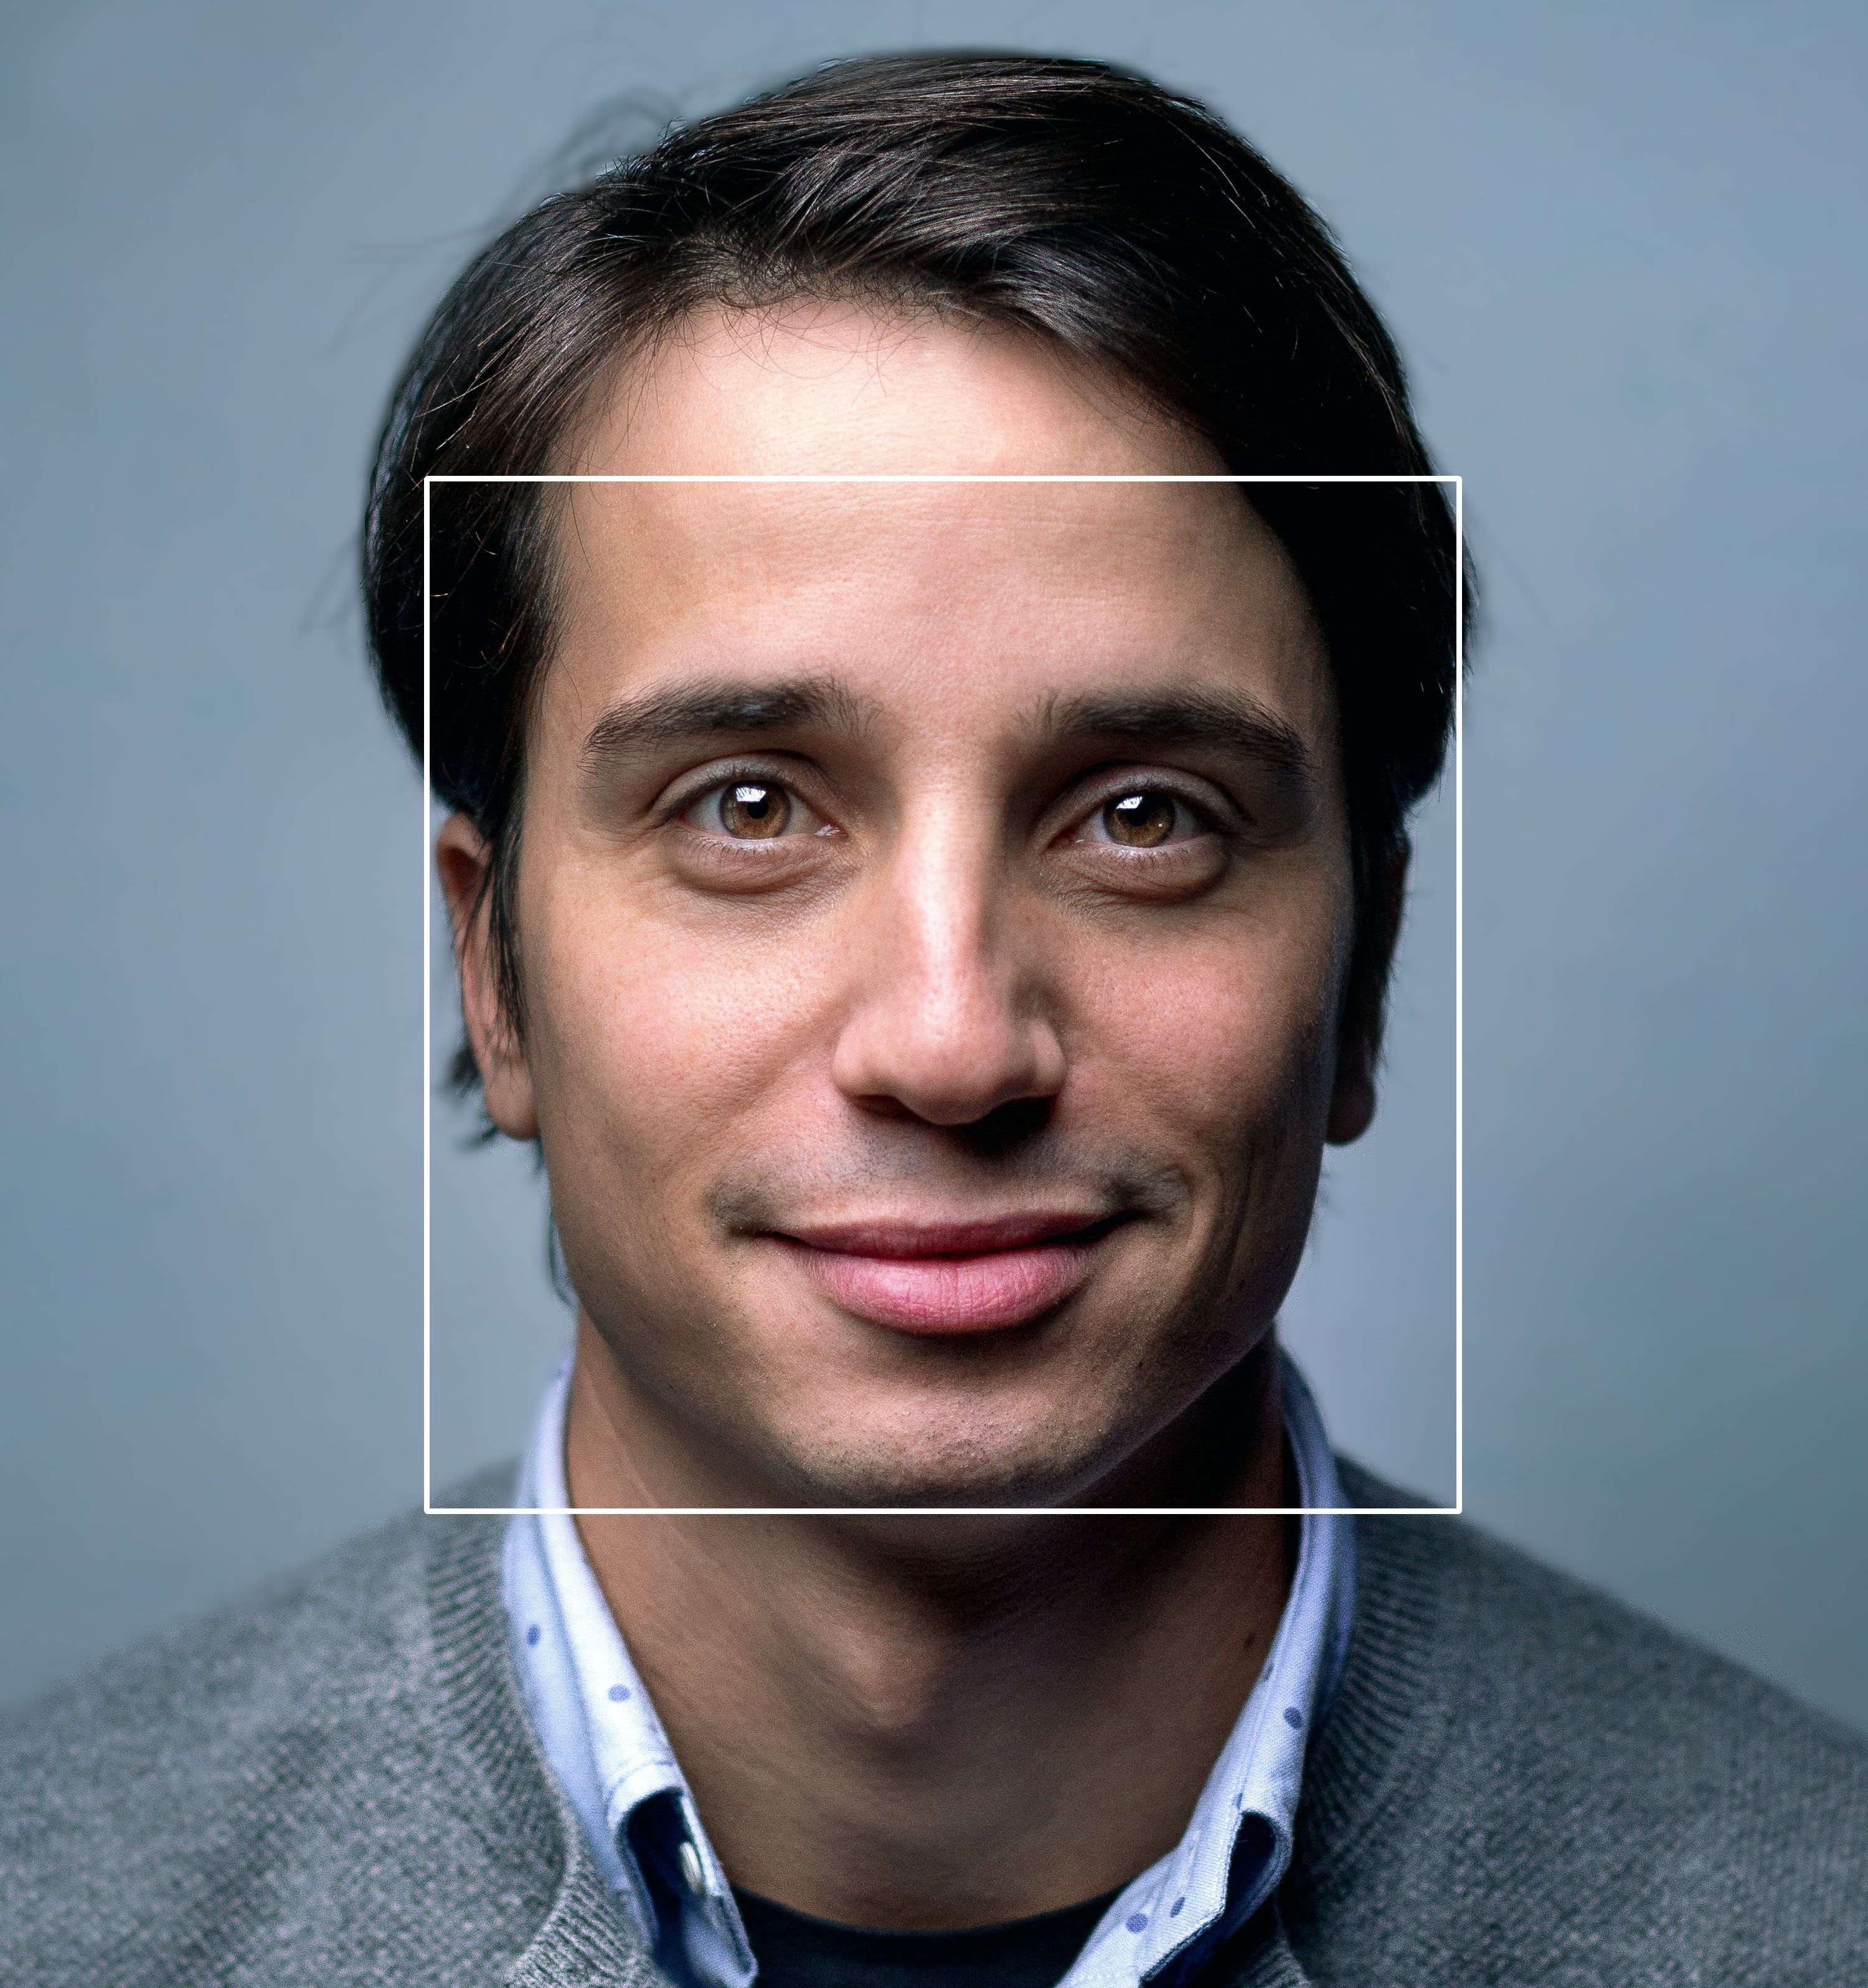 CPU Real-time Face Detection With Python